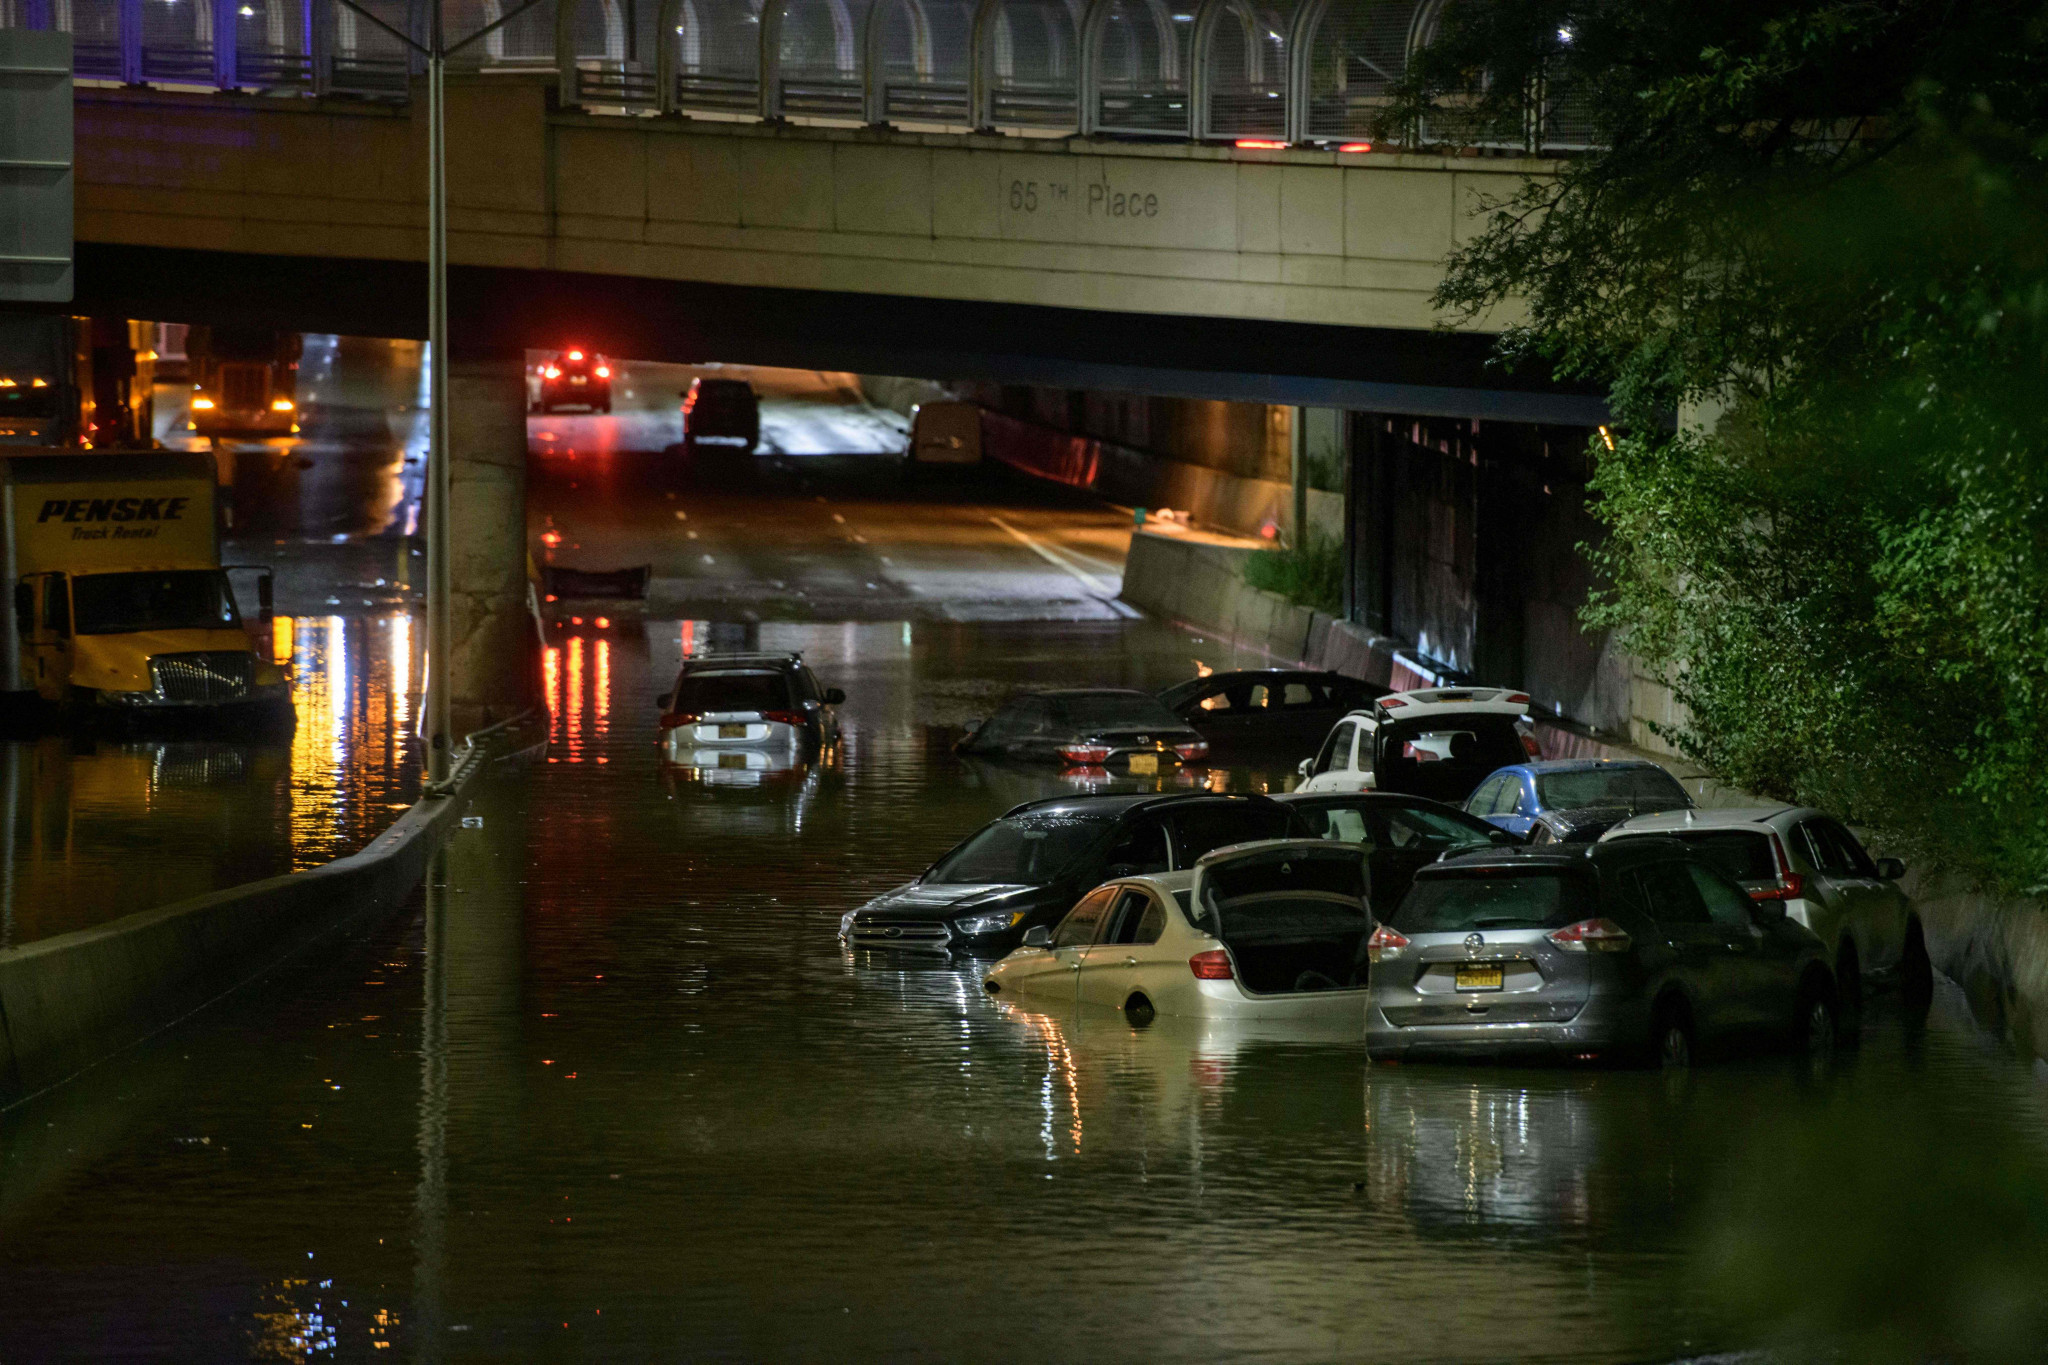 New York received 3.15 inches of rain in one hour, marginally less than the 3.19 that Chicago averages in a month ©Getty Images